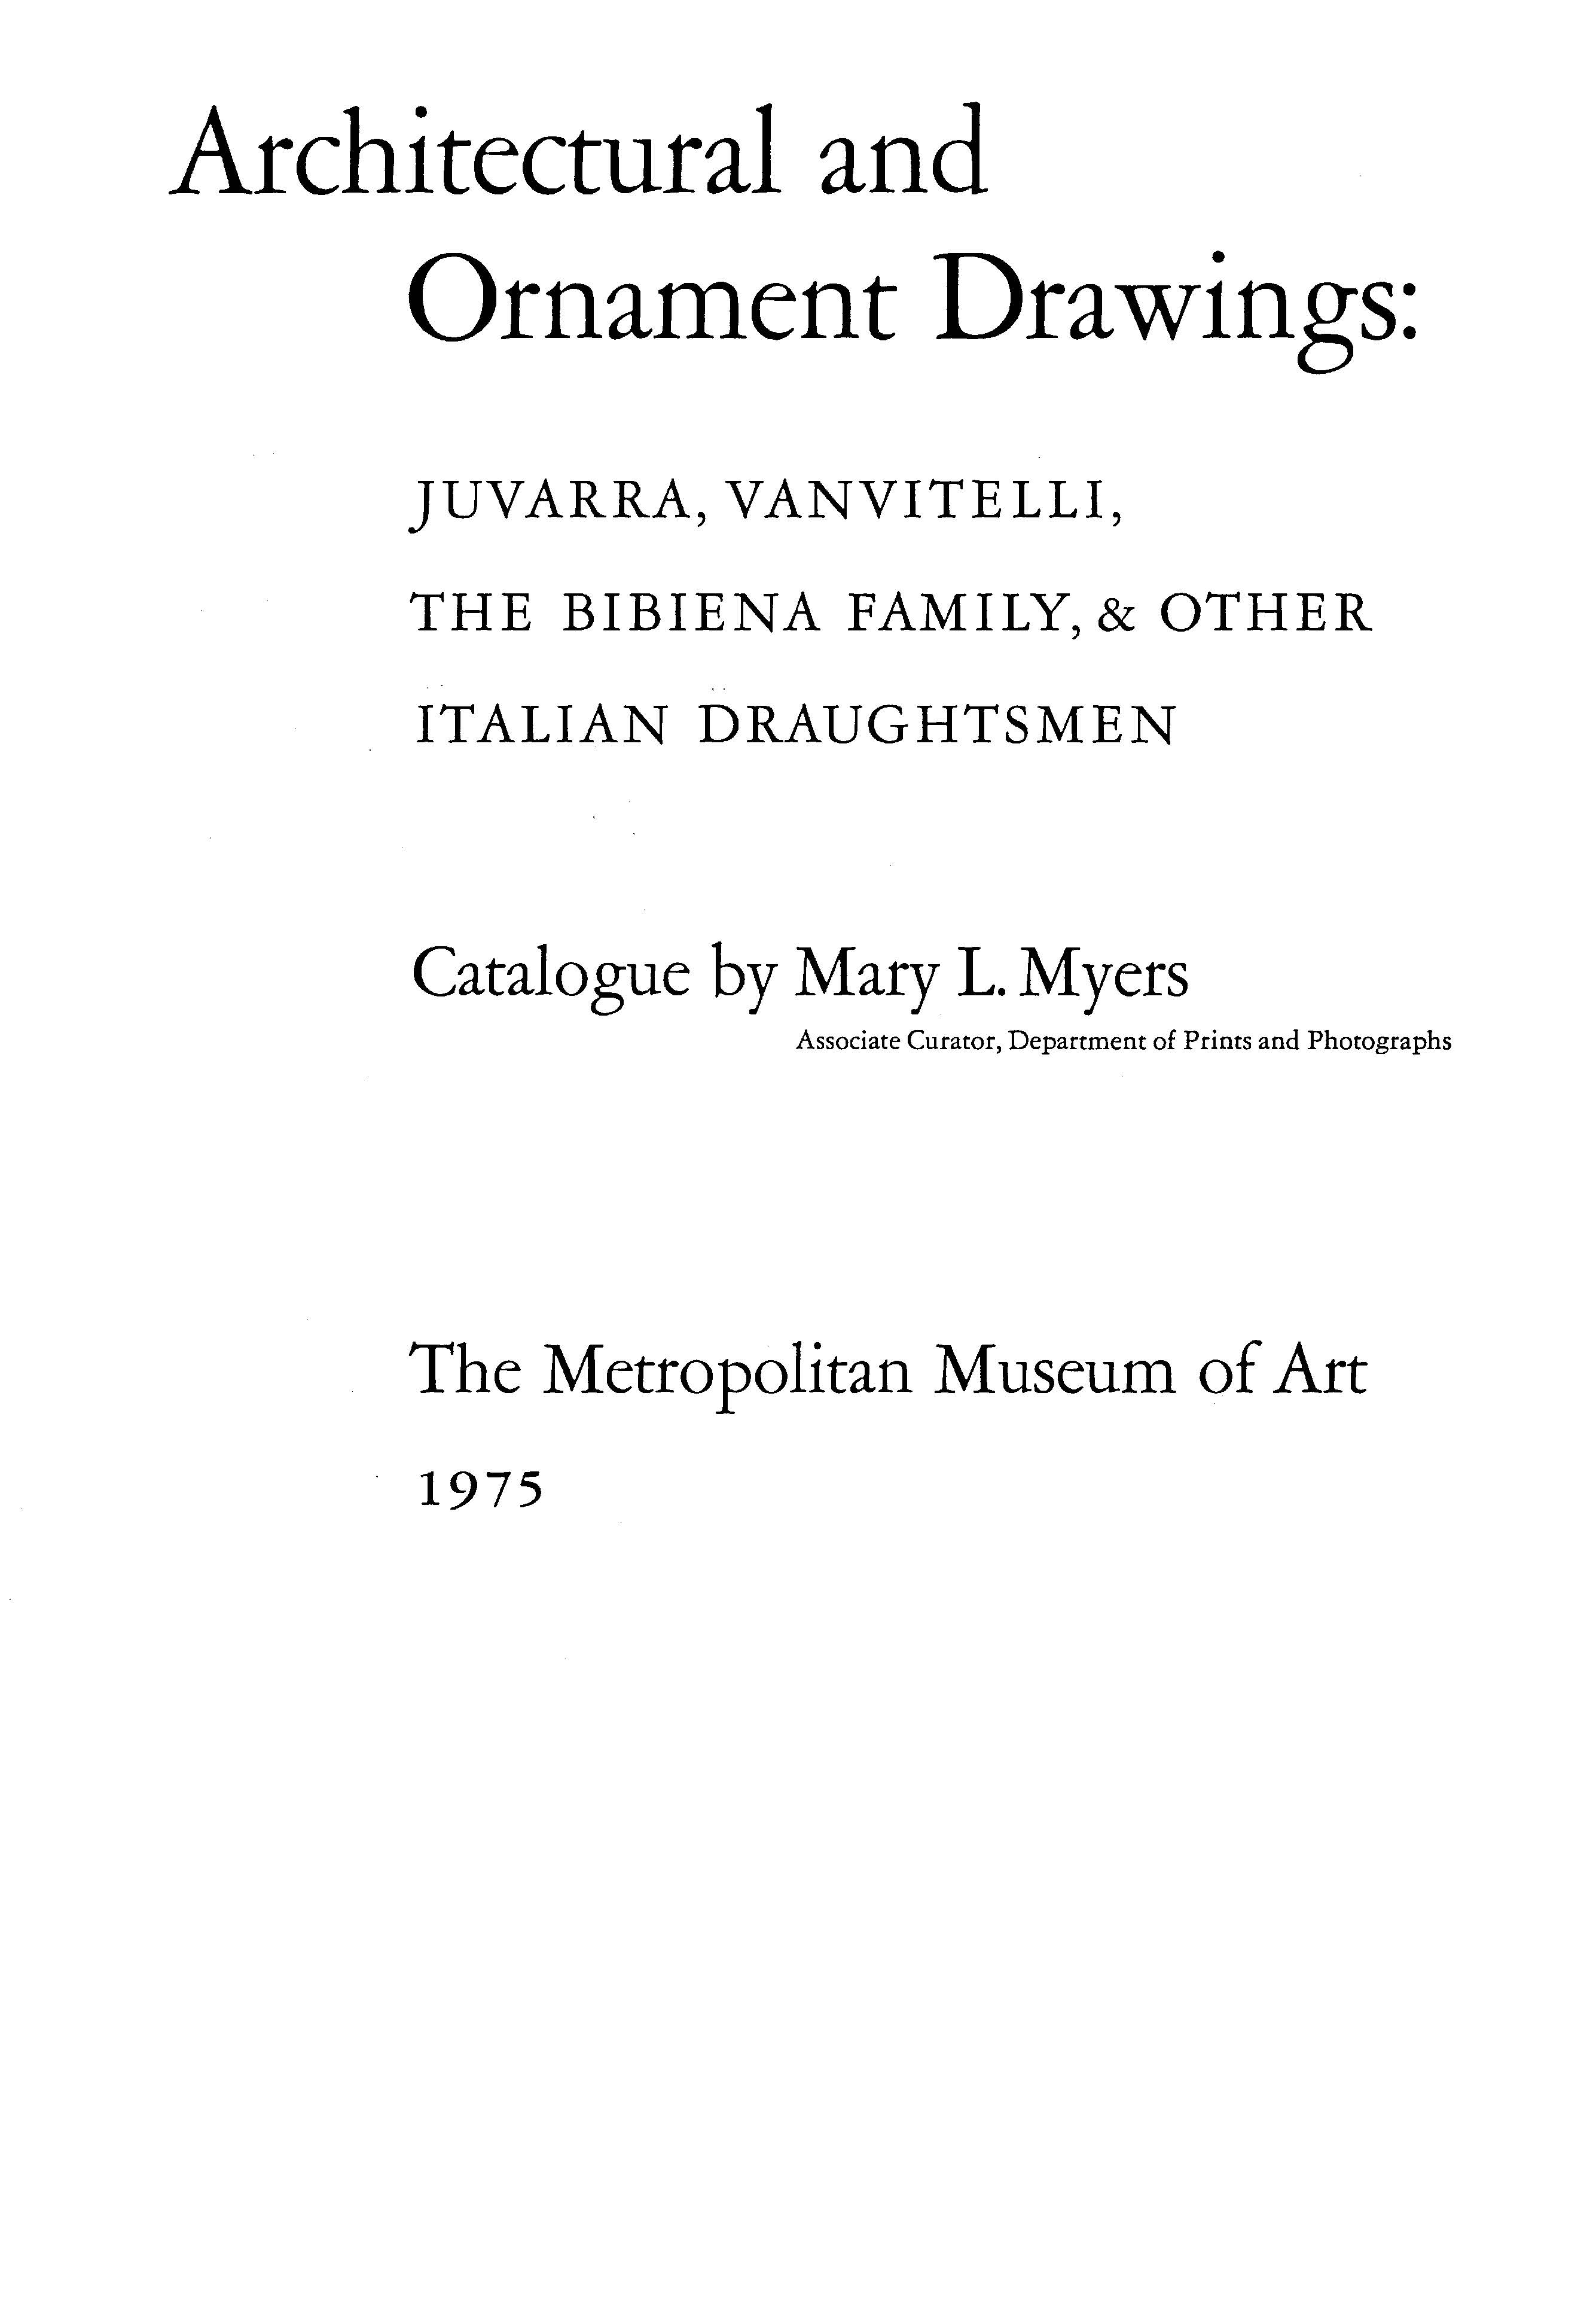 Architectural and Ornament Drawings: Juvarra, Vanvitelli, the Bibiena Family, and Other Italian Draughtsmen : Catalogue by Mary L. Myers. — New York : The Metropolitan Museum of Art, 1975